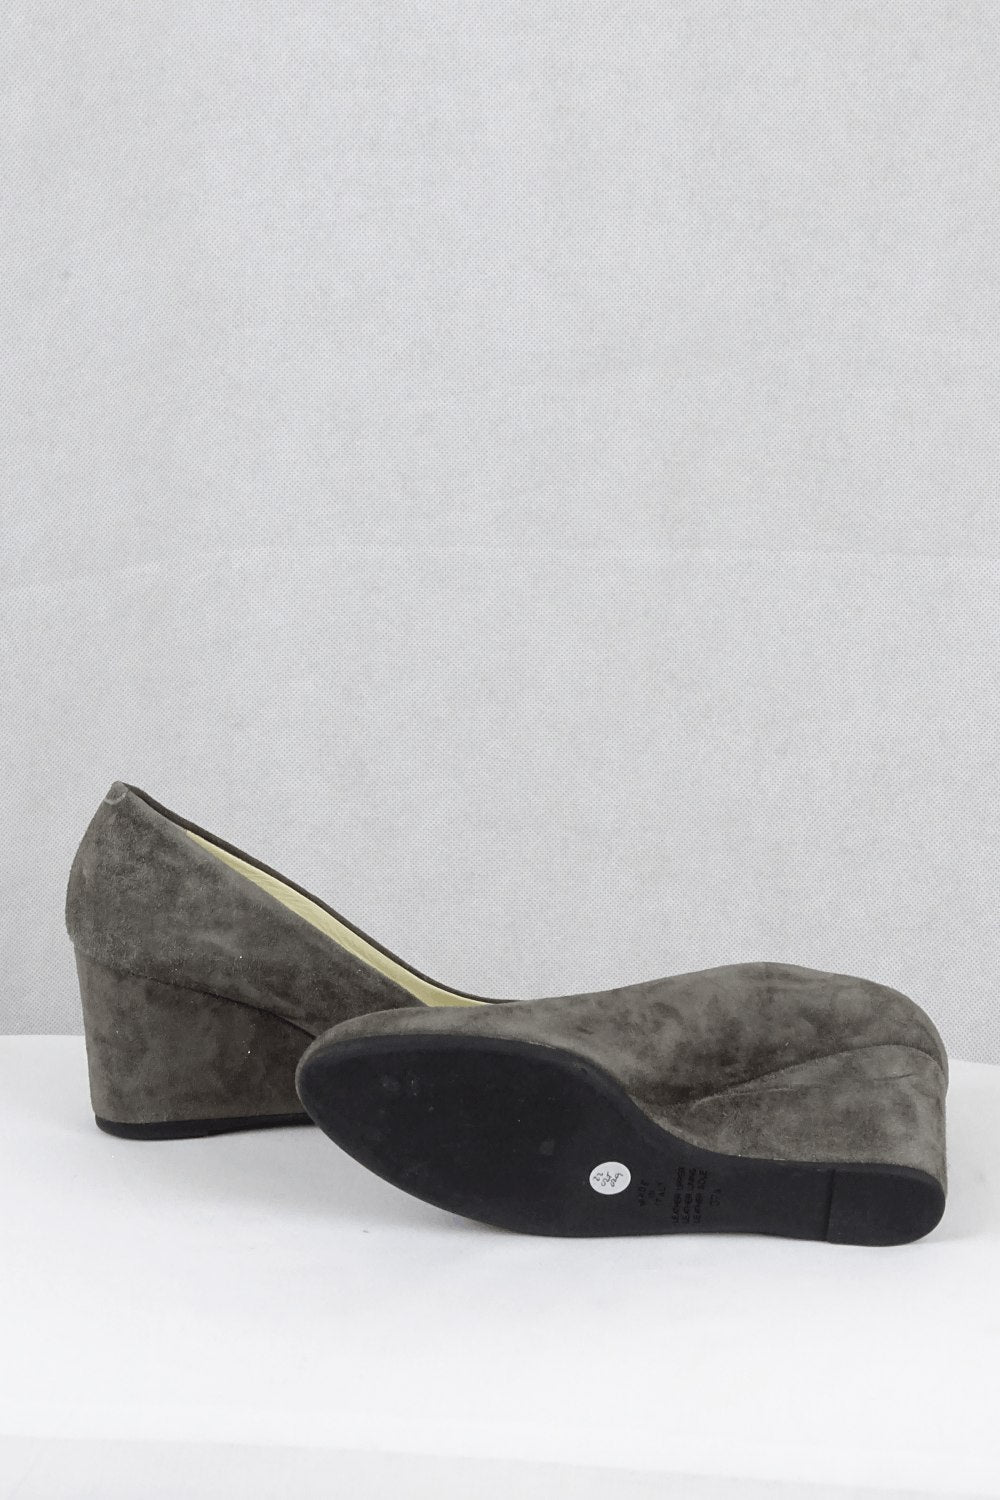 Innovare Suede Grey Wedged Shoes 37.5